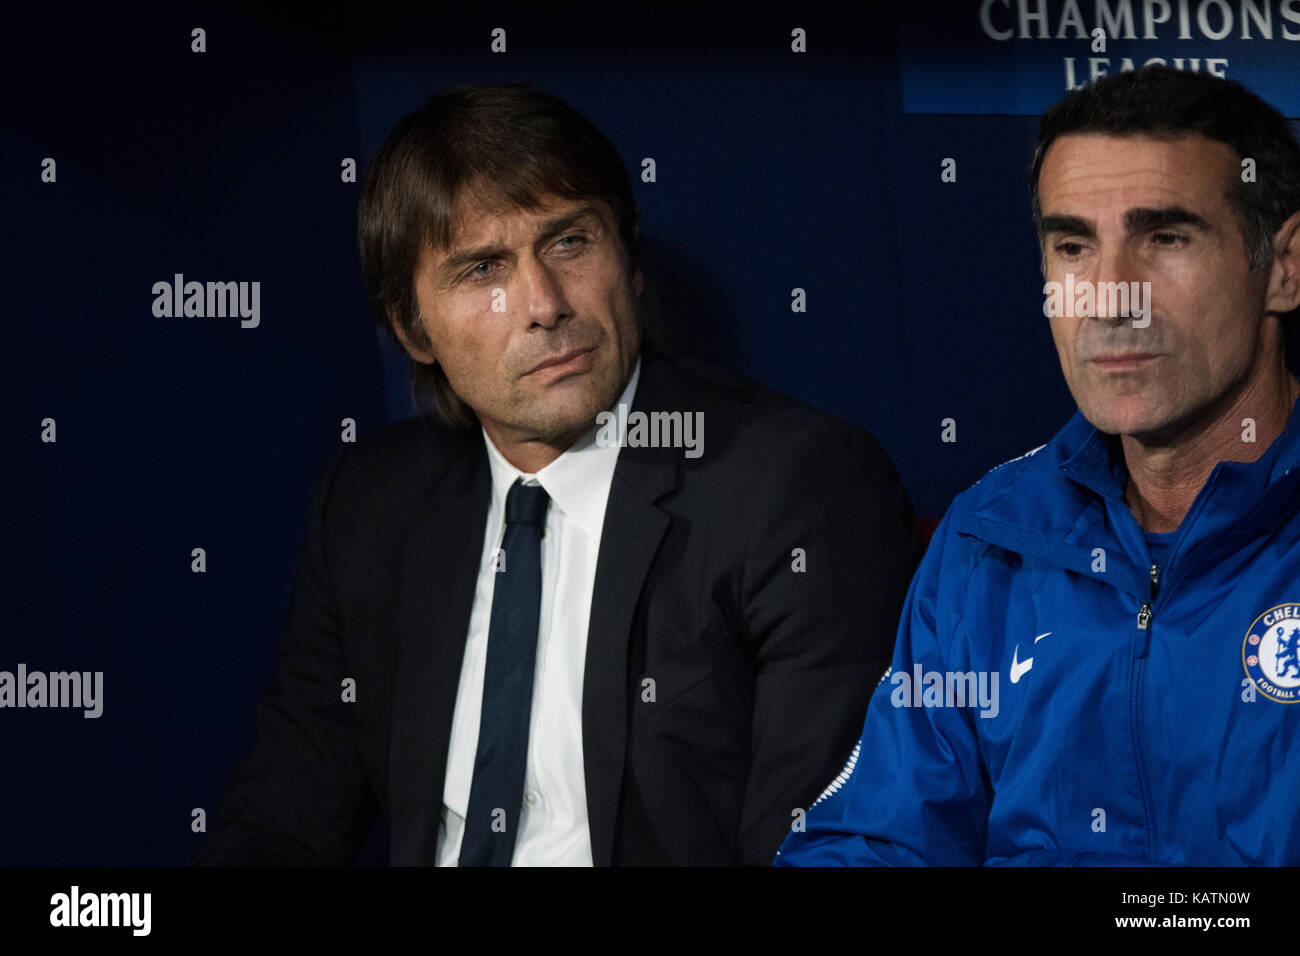 Antonio Conte High Resolution Stock Photography and Images - Alamy